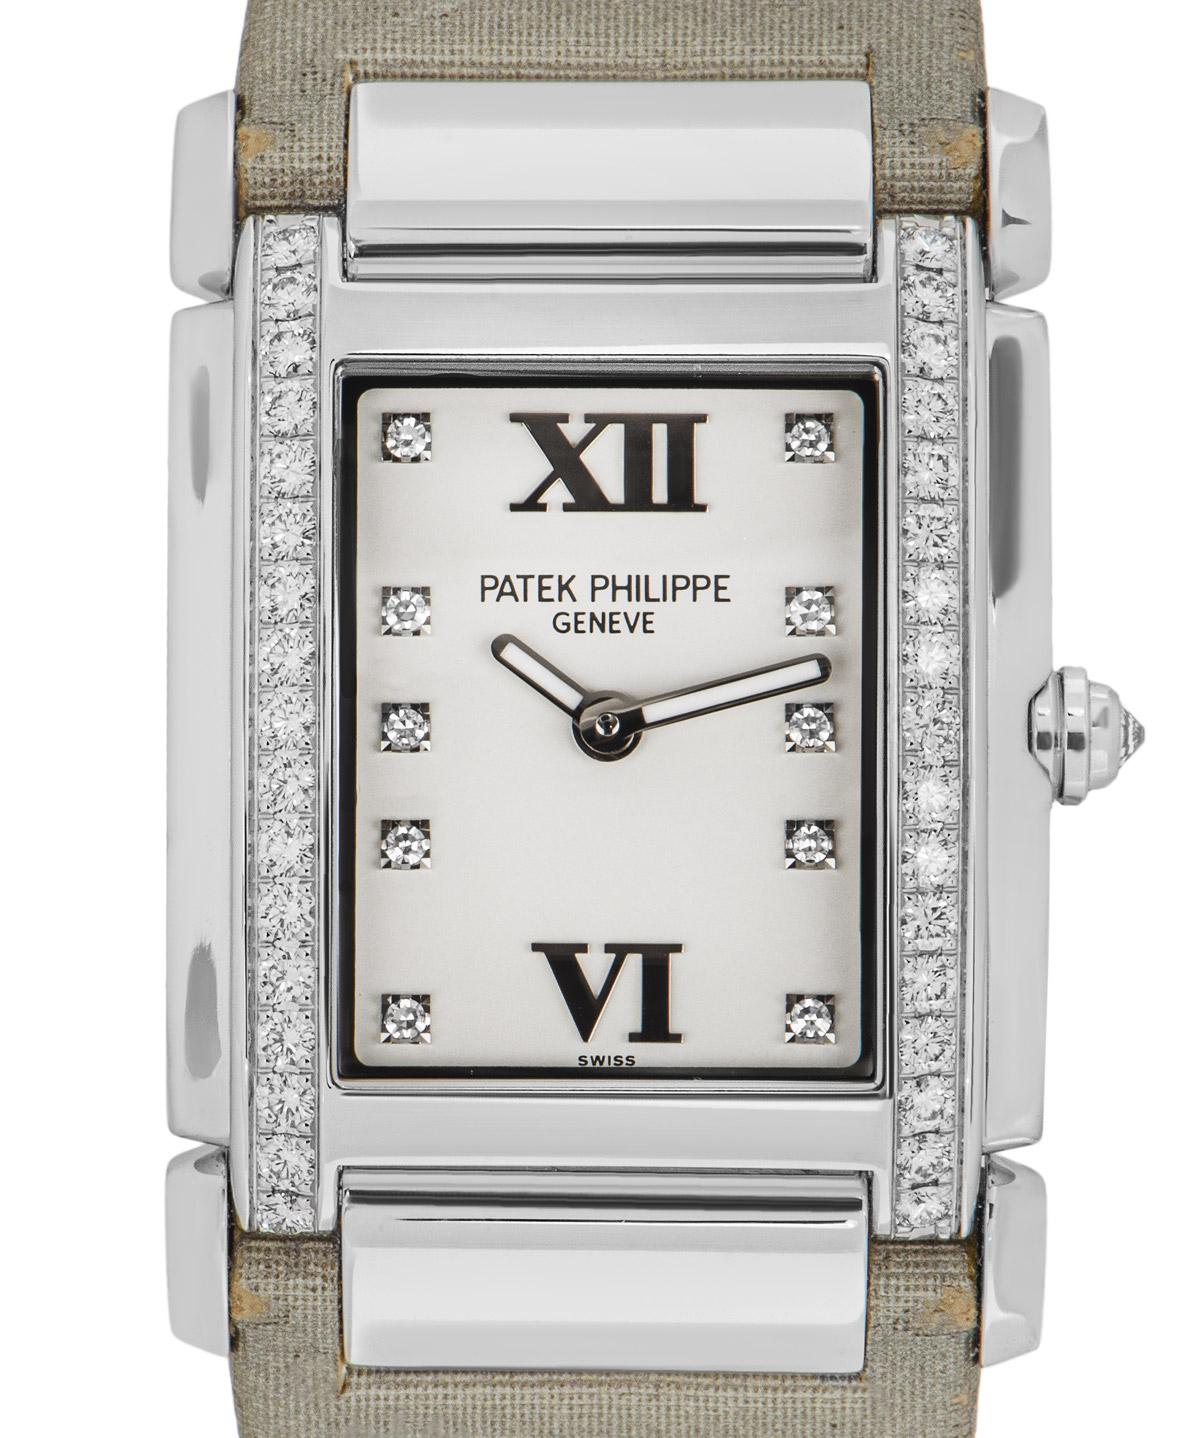 A ladies Twenty~4 wristwatch by Patek Philippe. Featuring an opaline silvered dial with 10 diamond hour markers and roman numerals VI and XII. The bezel is set with 34 round brilliant cut diamonds and the crown set with a single inverted diamond